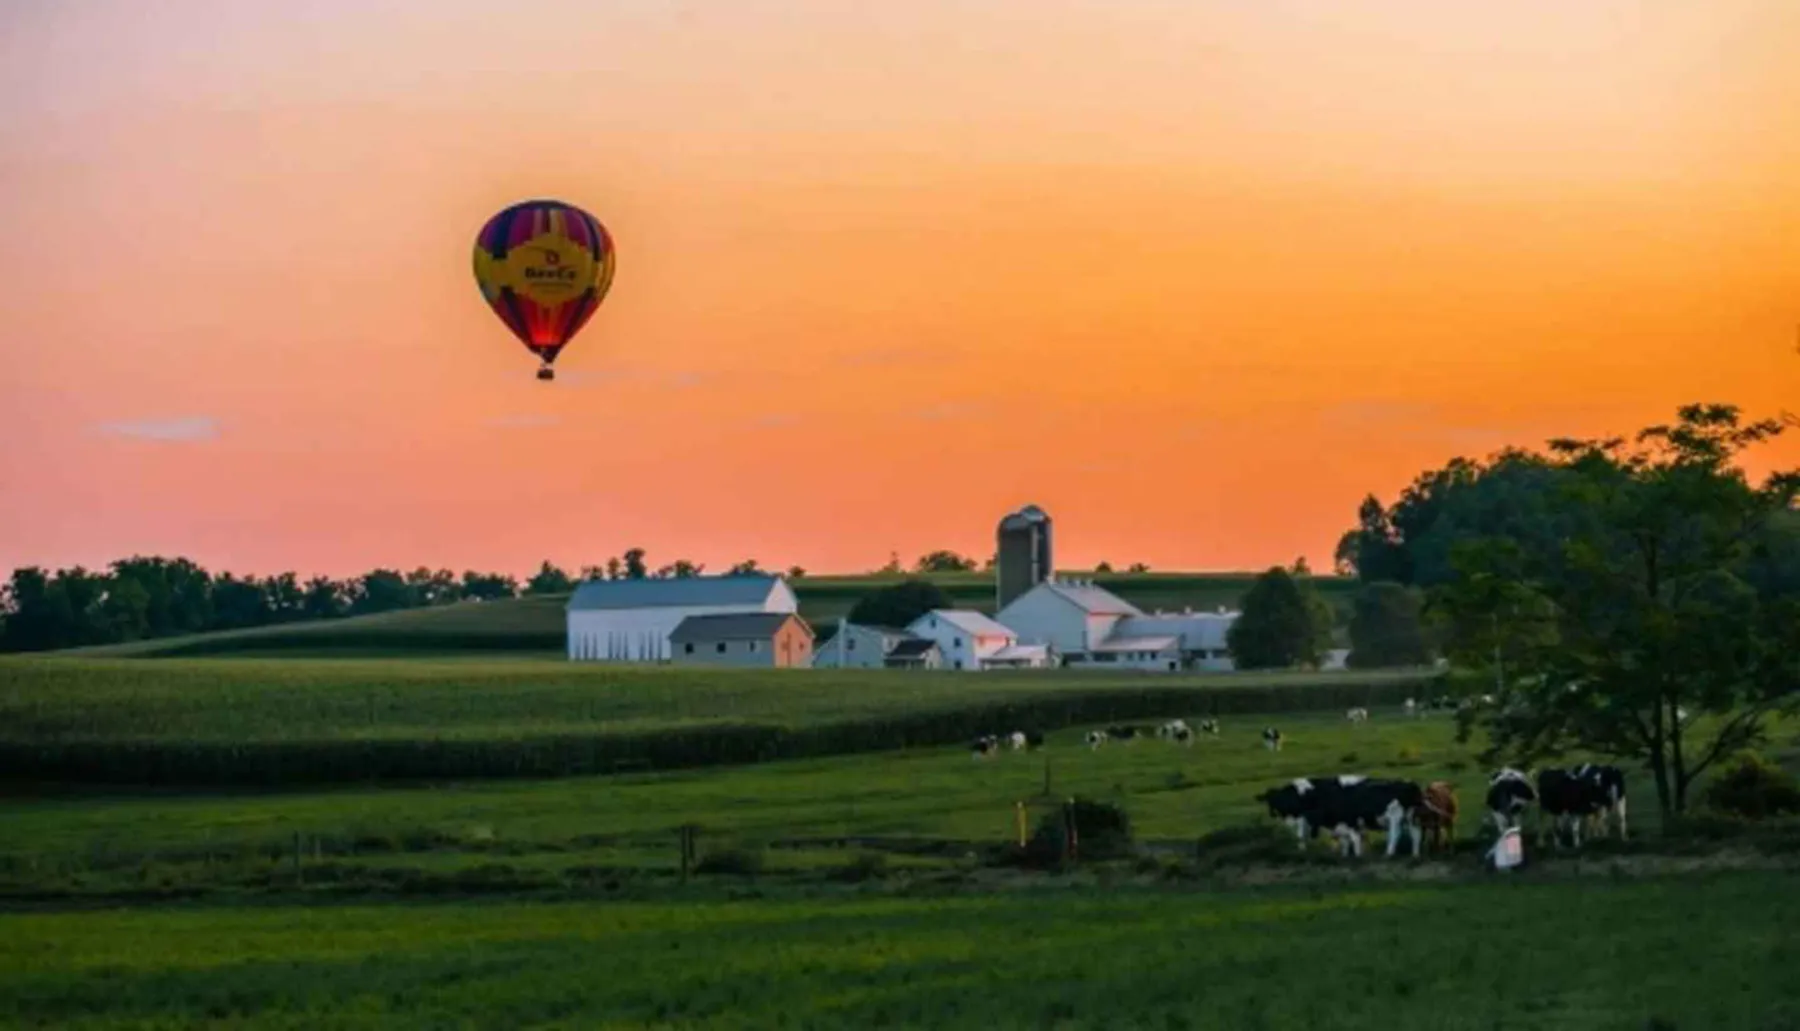 A hot air balloon floats above a pastoral farm scene with cows grazing as the sun sets, painting the sky in shades of pink and orange.